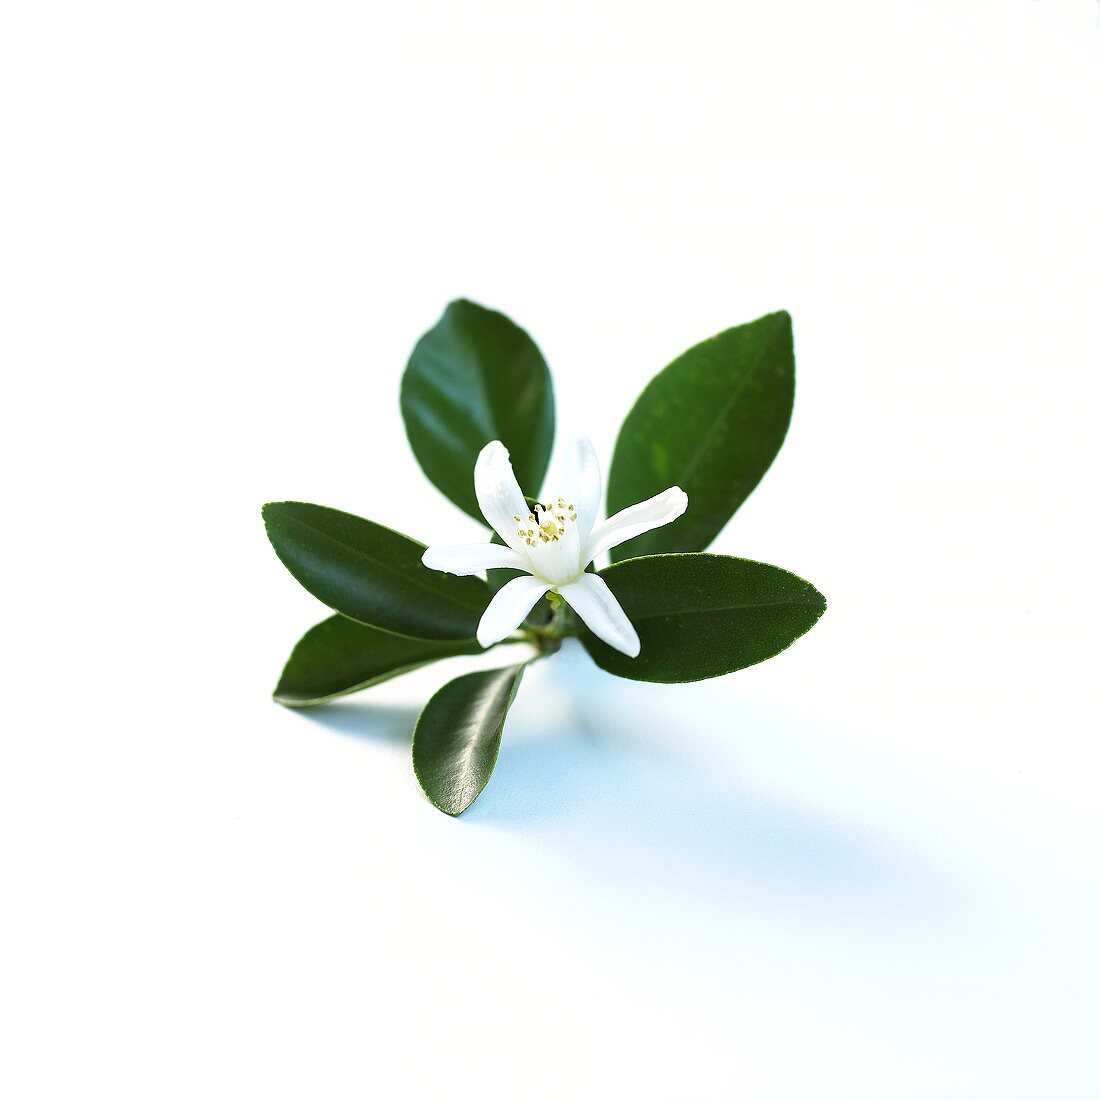 Orange blossom with leaves